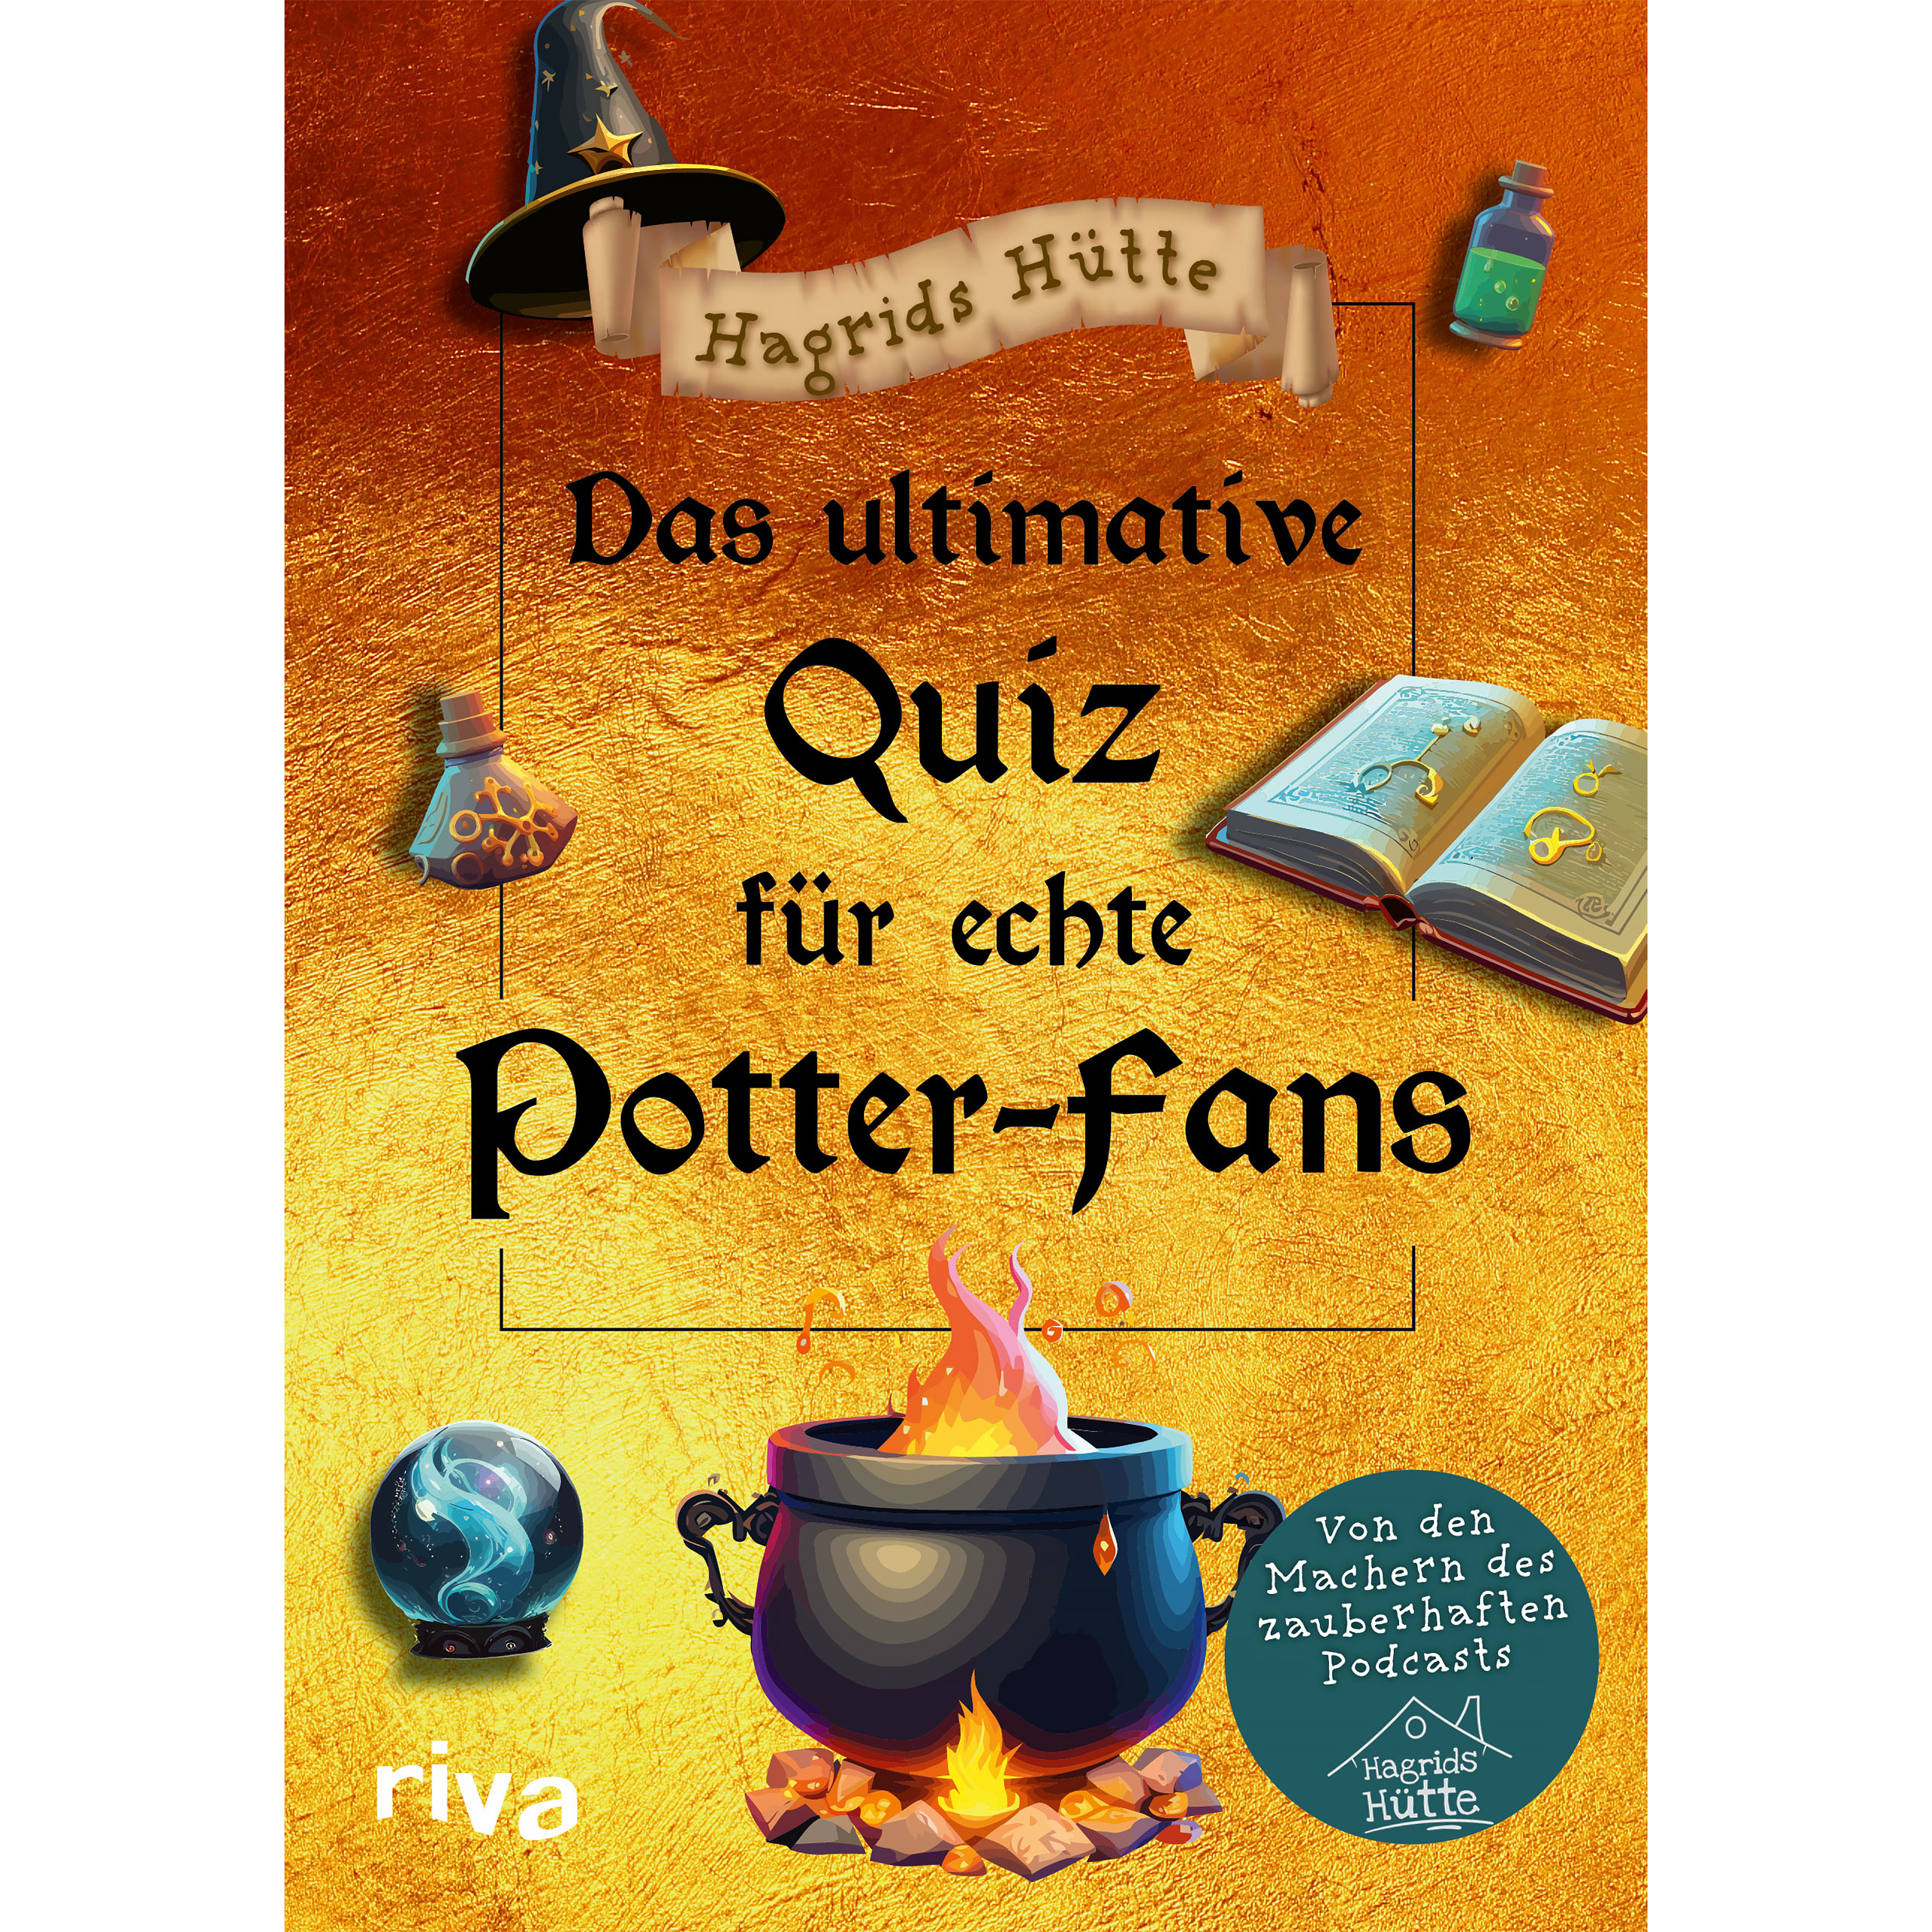 The ultimate quiz for true Potter fans